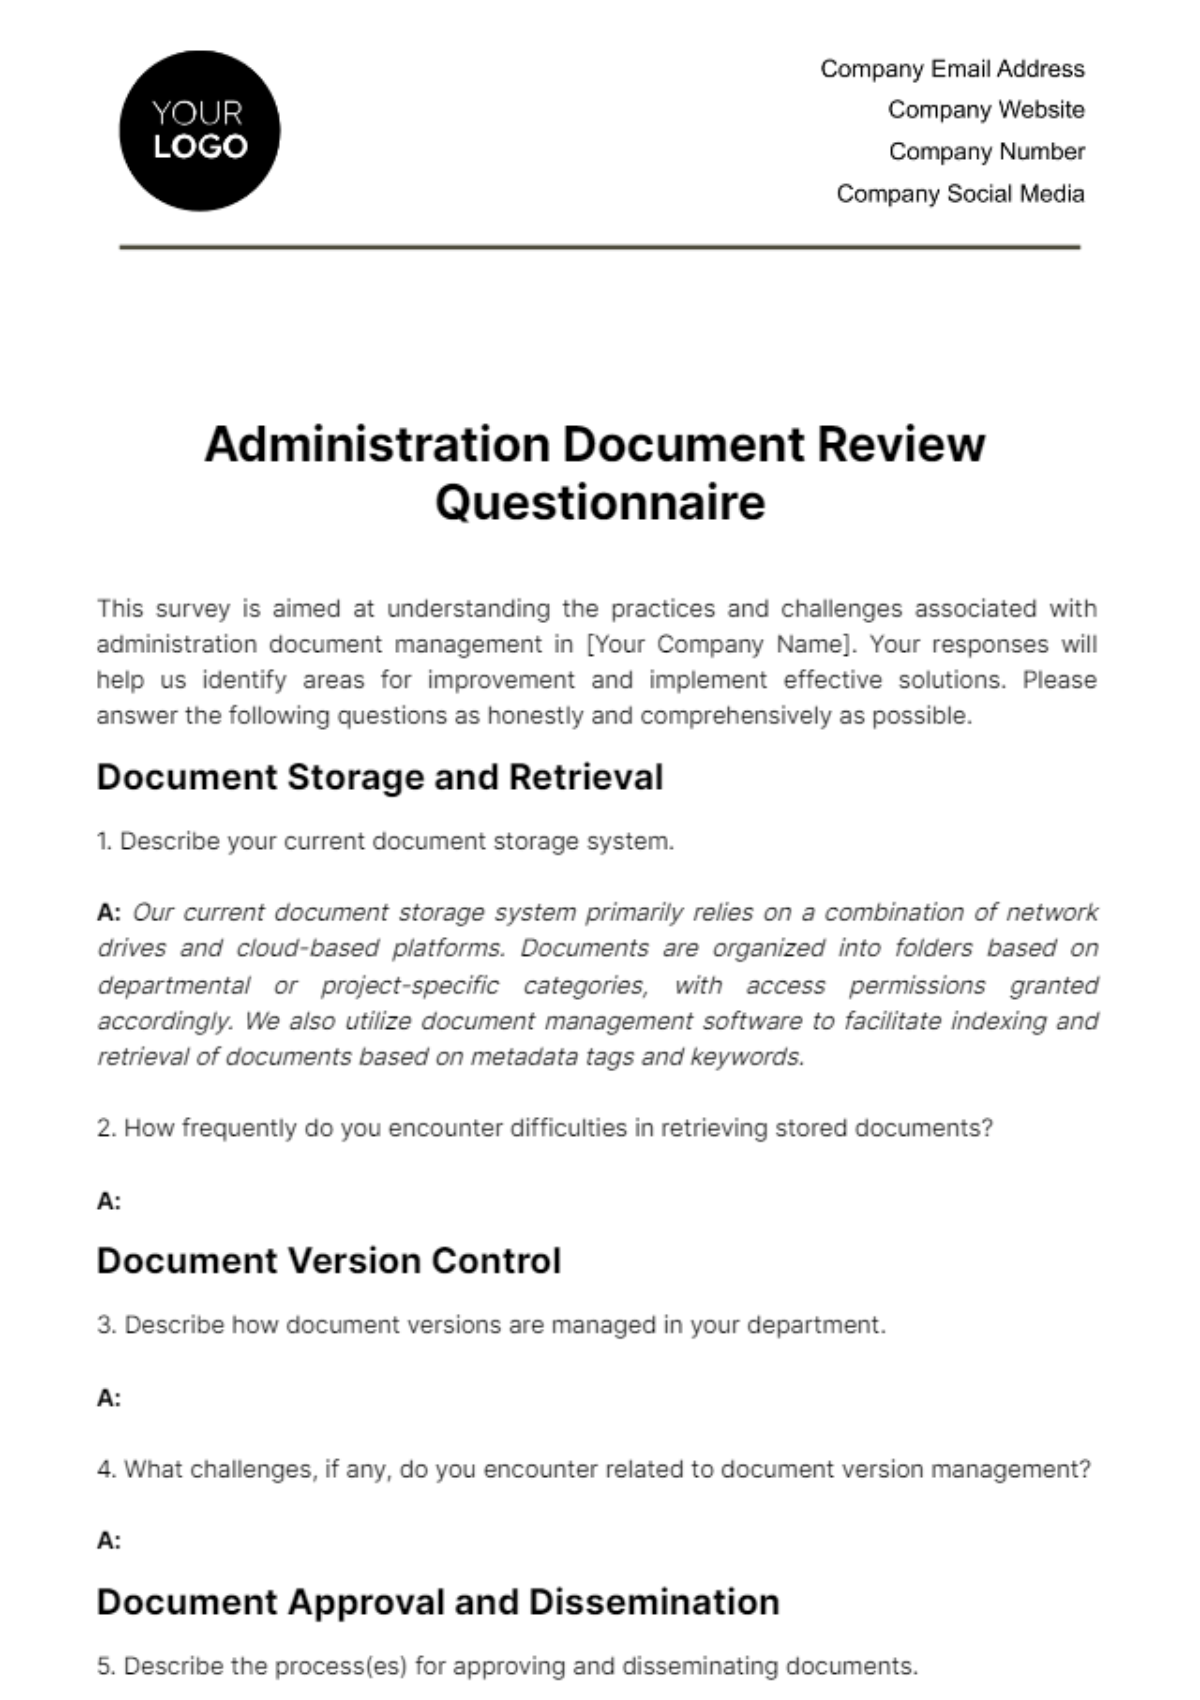 Administration Document Review Questionnaire Template